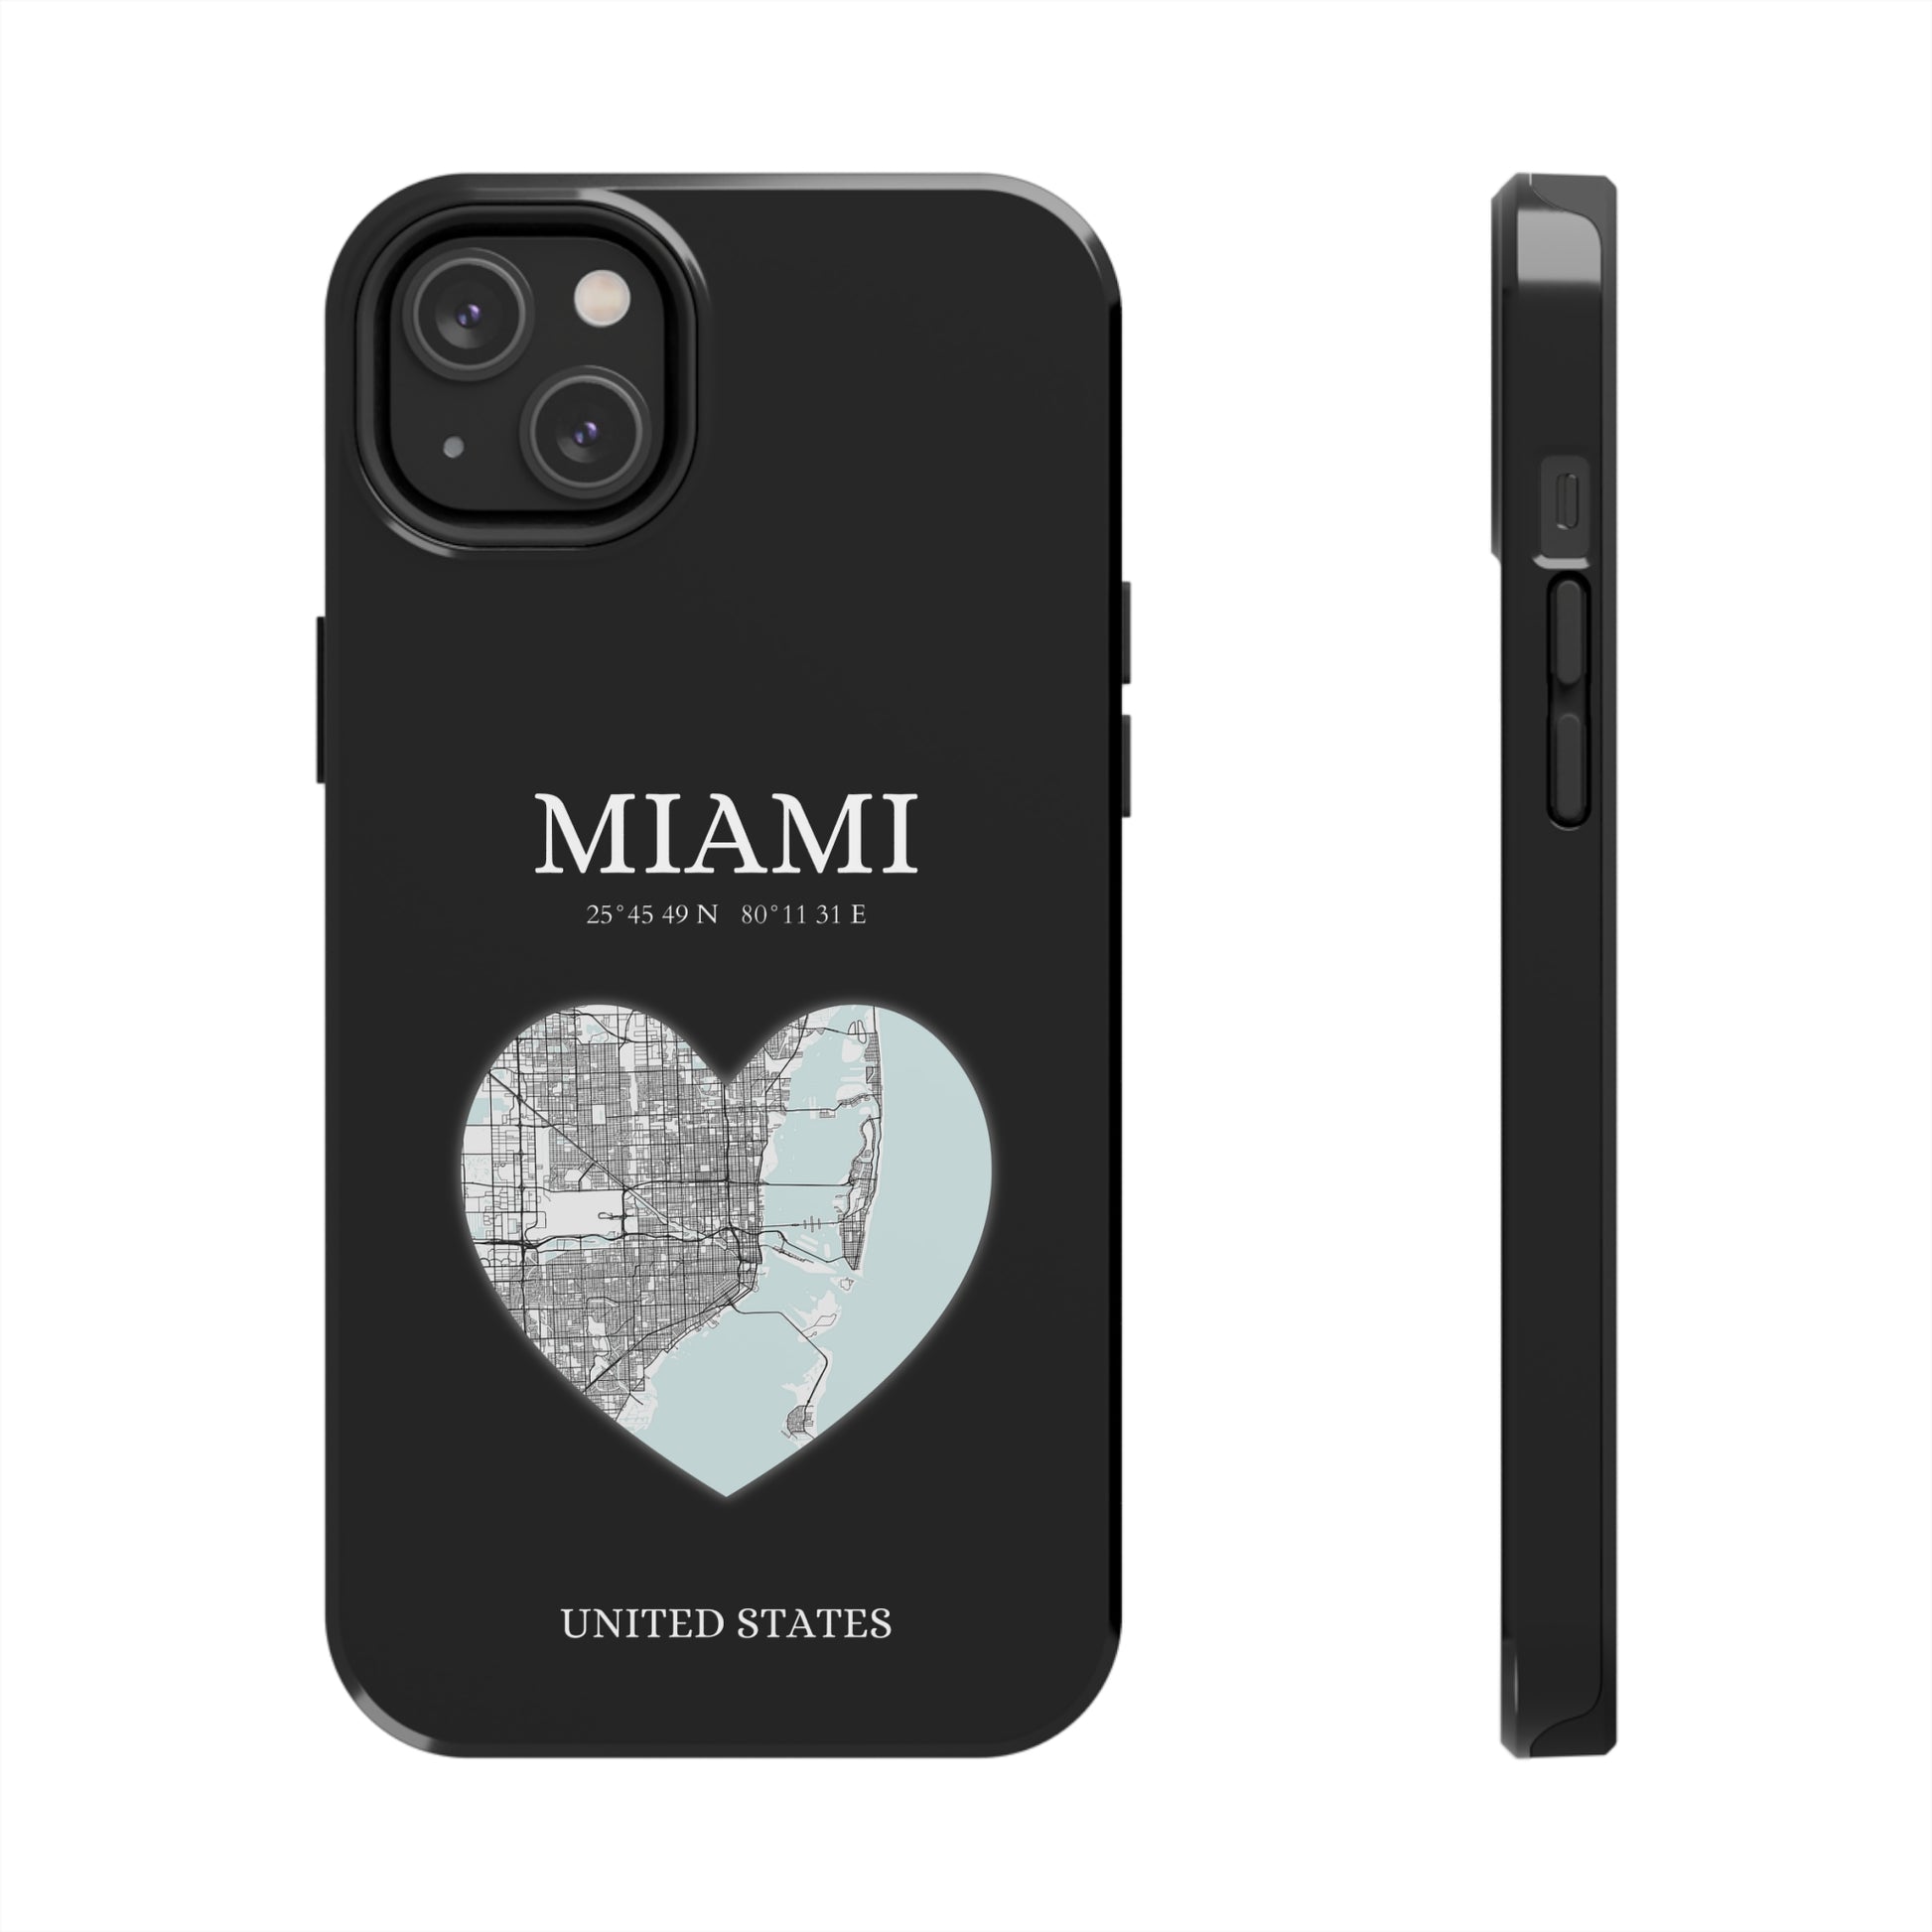 Miami Heartbeat - Black (iPhone Case 11-15)Elevate your iPhone's style with Rima's Miami Heartbeat case. Sleek, durable protection for models 11-15. Free US shipping.RimaGallery